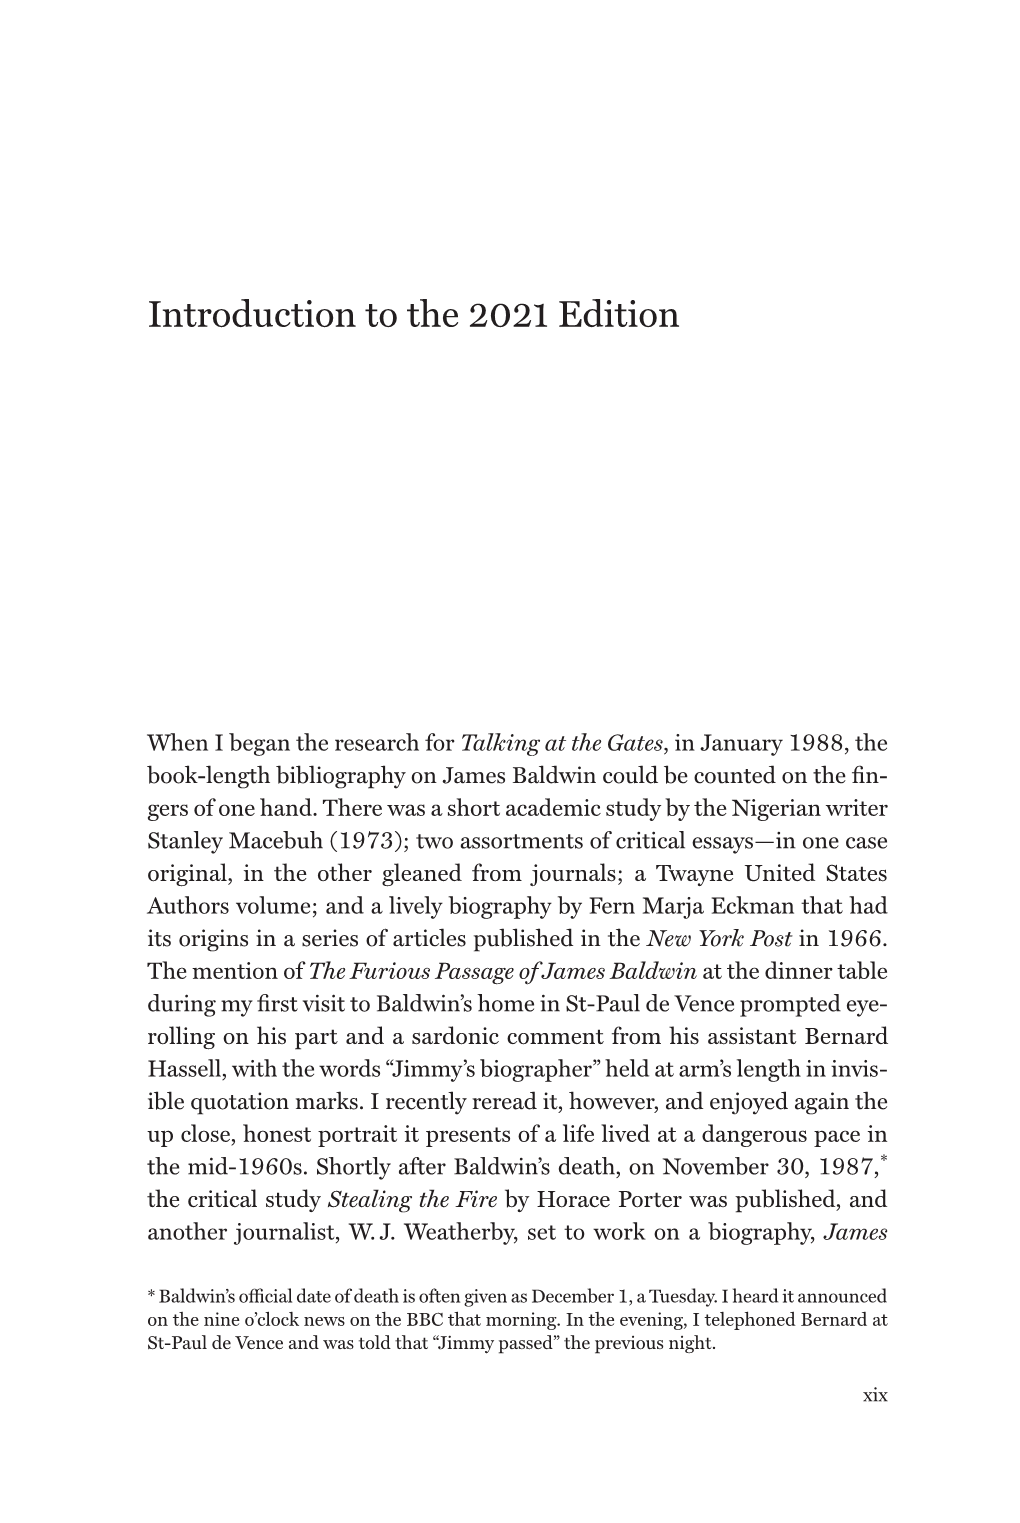 Introduction to the 2021 Edition